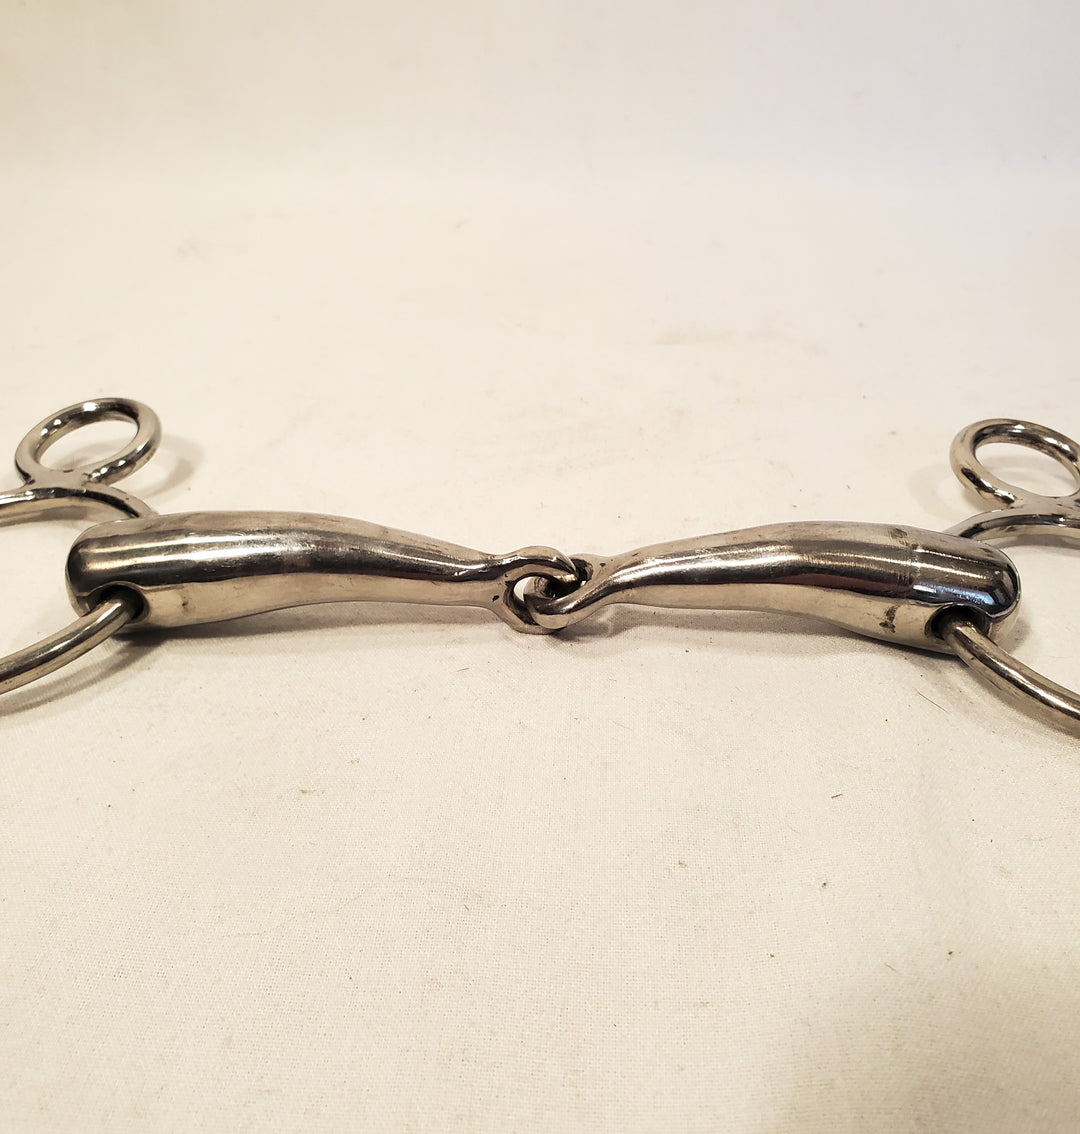 4-Ring Weighted 20 mm Elevator Snaffle - 5.75" - New!